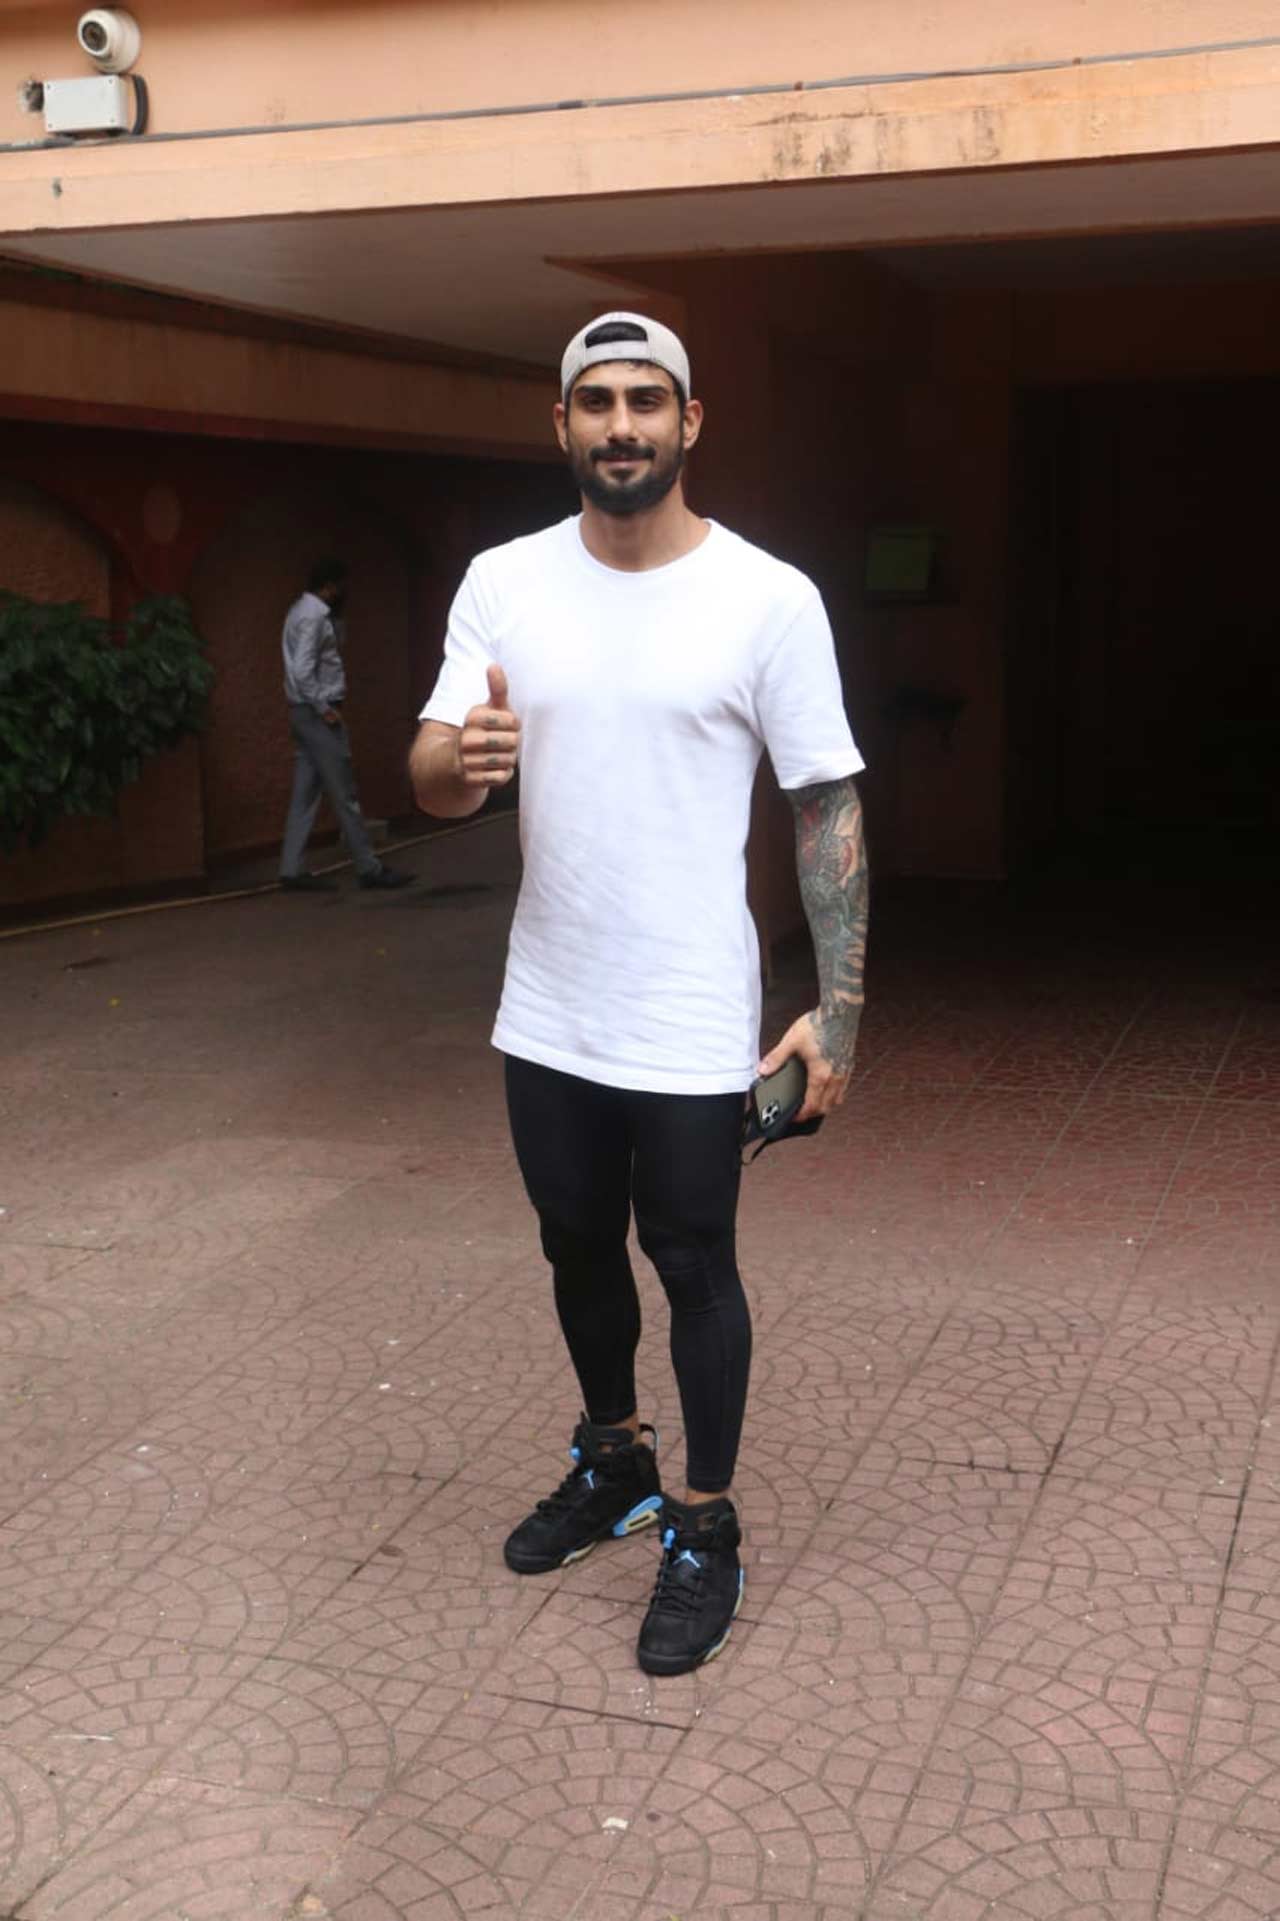 Prateik Babbar looked dapper in a casual outing in the city. Babbar has been in the Hindi film industry for over a decade. He calls it an eventful journey with lots of ups and downs. Prateik made his Bollywood debut in 2008 with the coming of age romantic film 'Jaane Tu... Ya Jaane Na'. He was then seen in movies such as 'Dhobi Ghat', 'Aarakshan', 'Ekk Deewana Tha', 'Baaghi 2', 'Mulk', 'Chhichhore' and 'Mumbai Saga'.